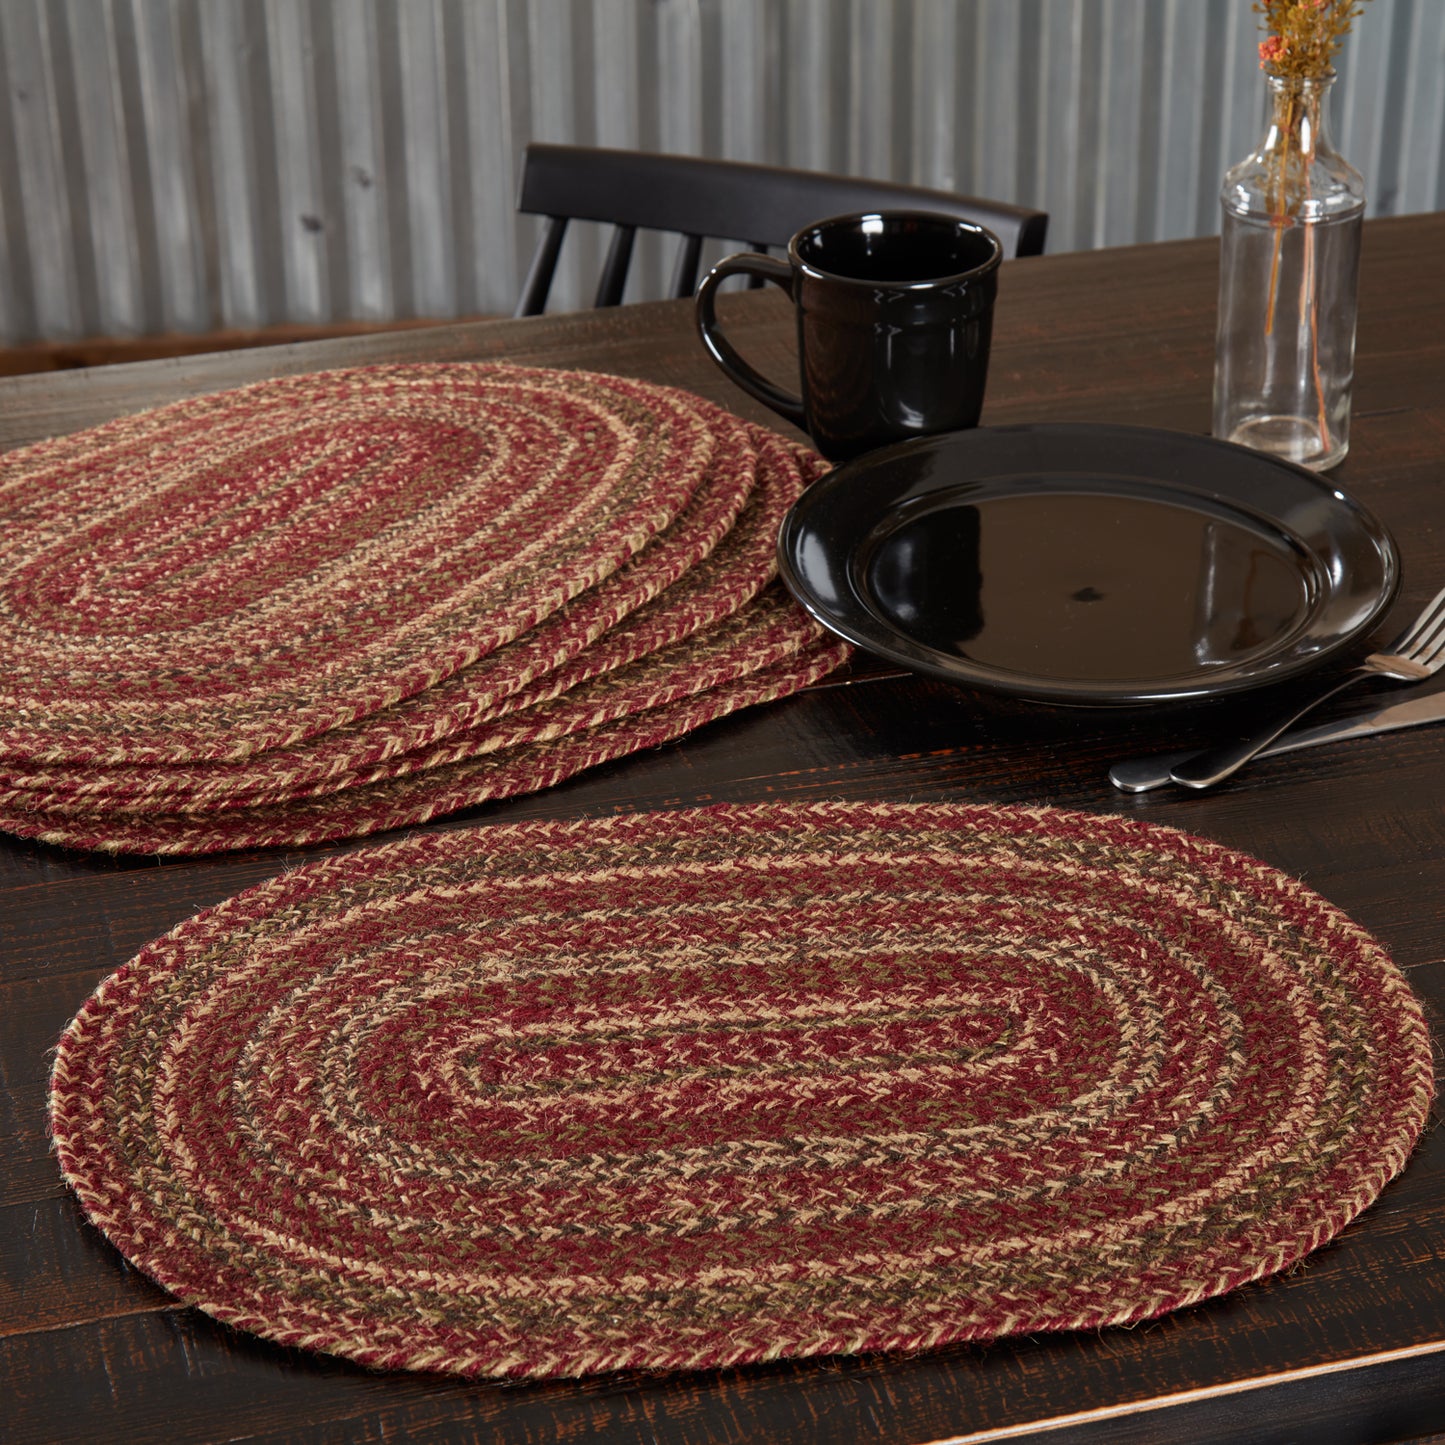 Prairie Wood Placemats - Chindi Set of 6 - Country Village Shoppe